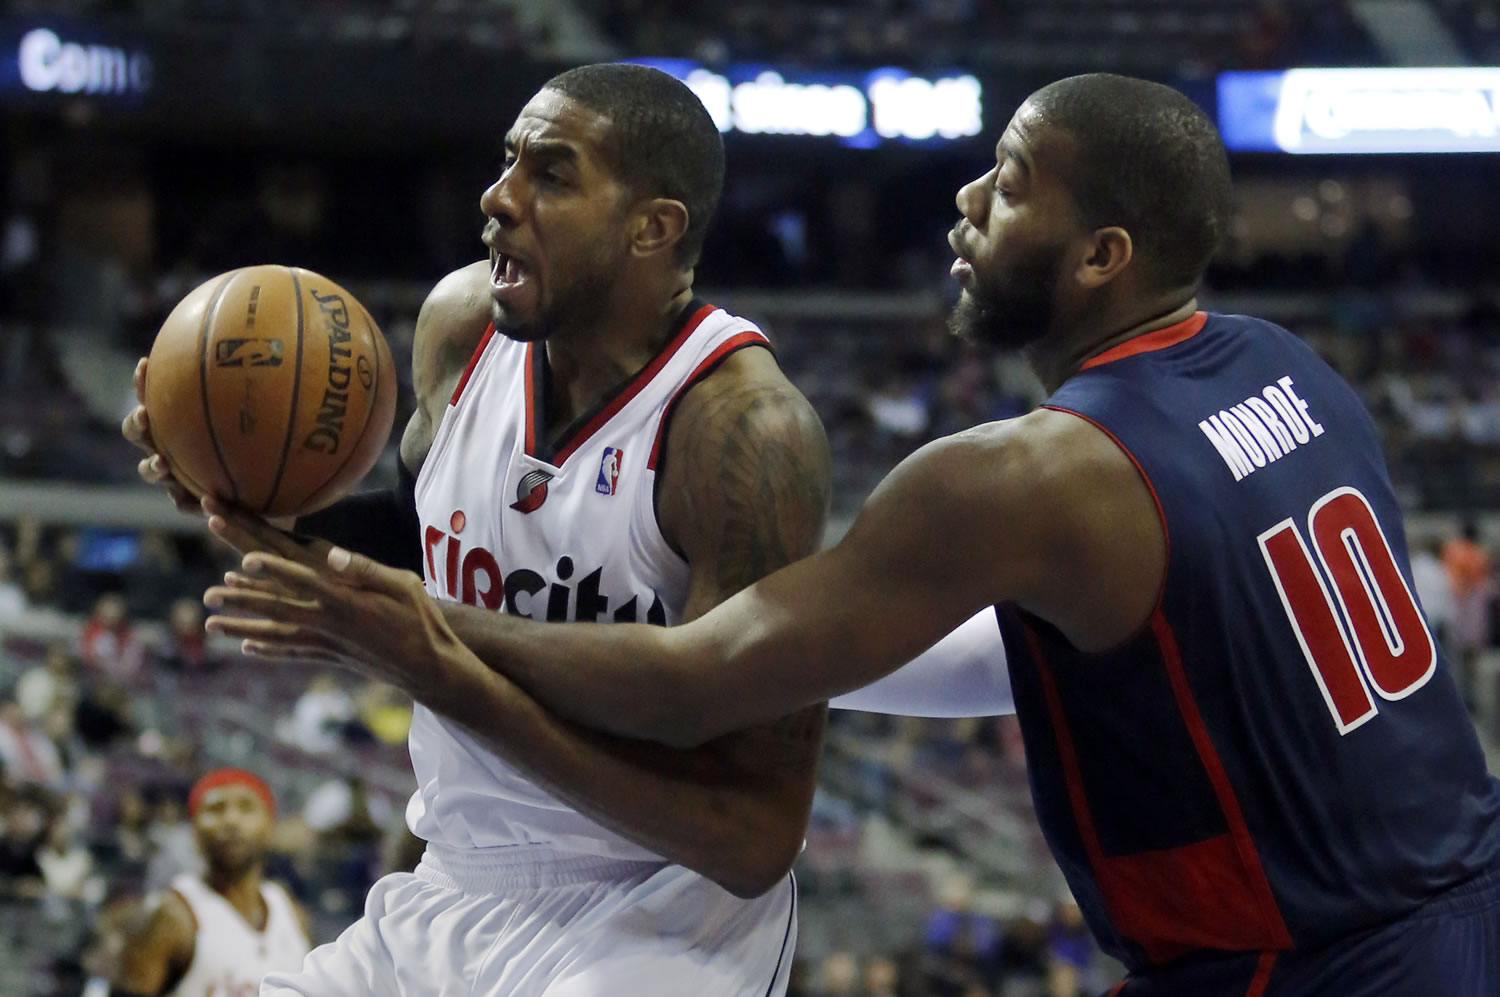 Portland Trail Blazers forward LaMarcus Aldridge, left, is fouled by Detroit Pistons center Greg Monroe (10) while going to the basket during the second half Sunday.